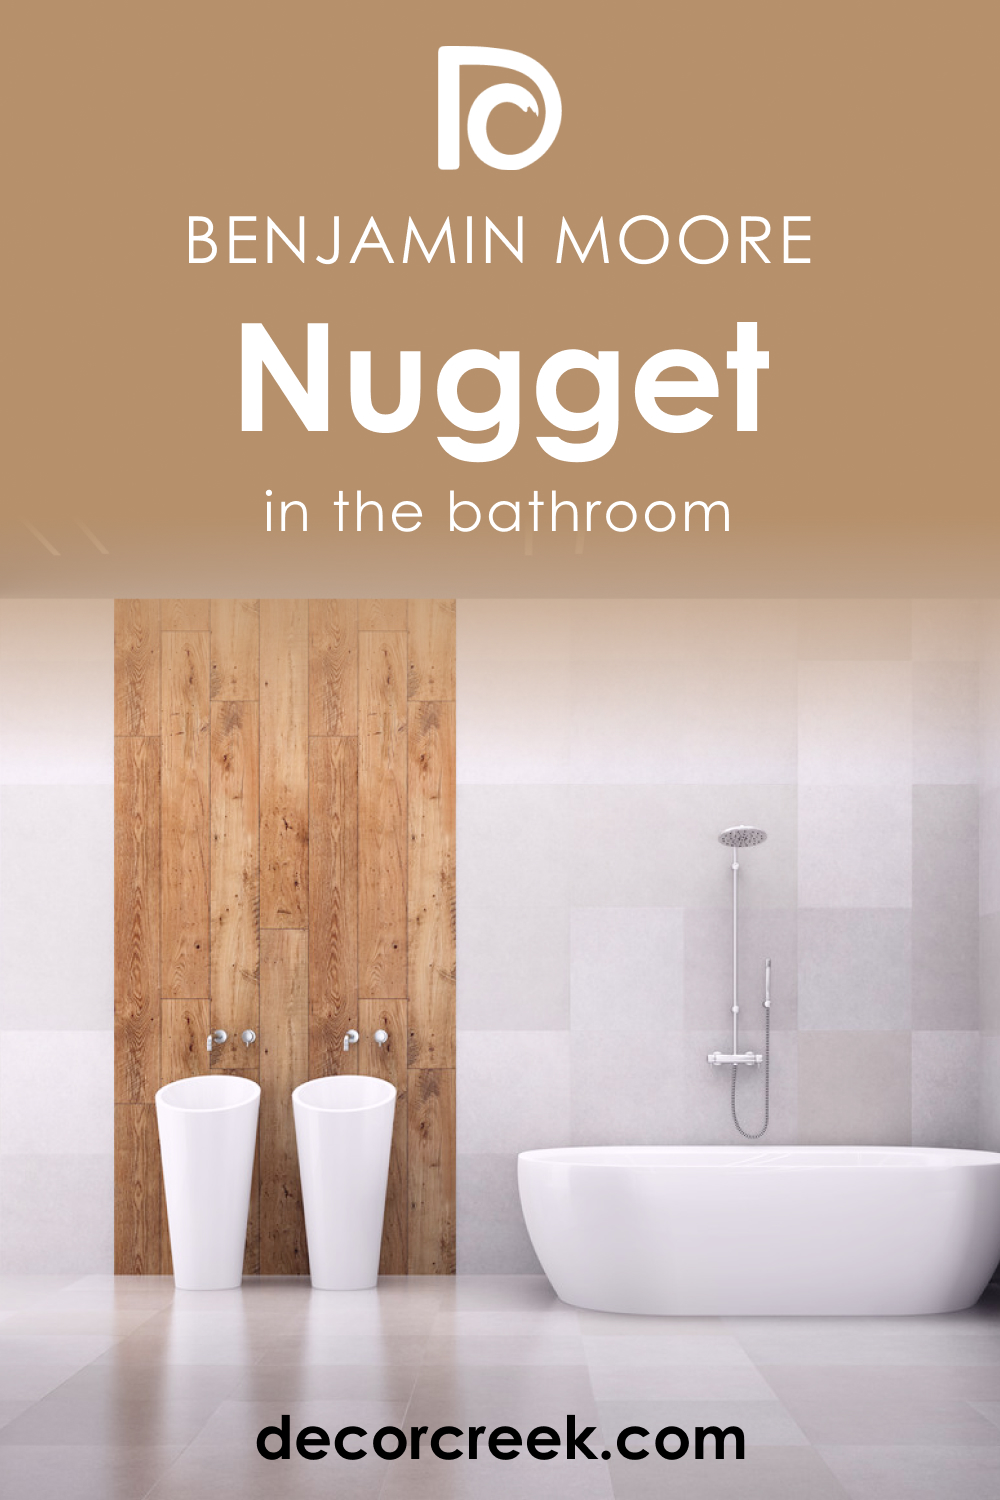 How to Use Nugget AC-9 in the Bathroom?